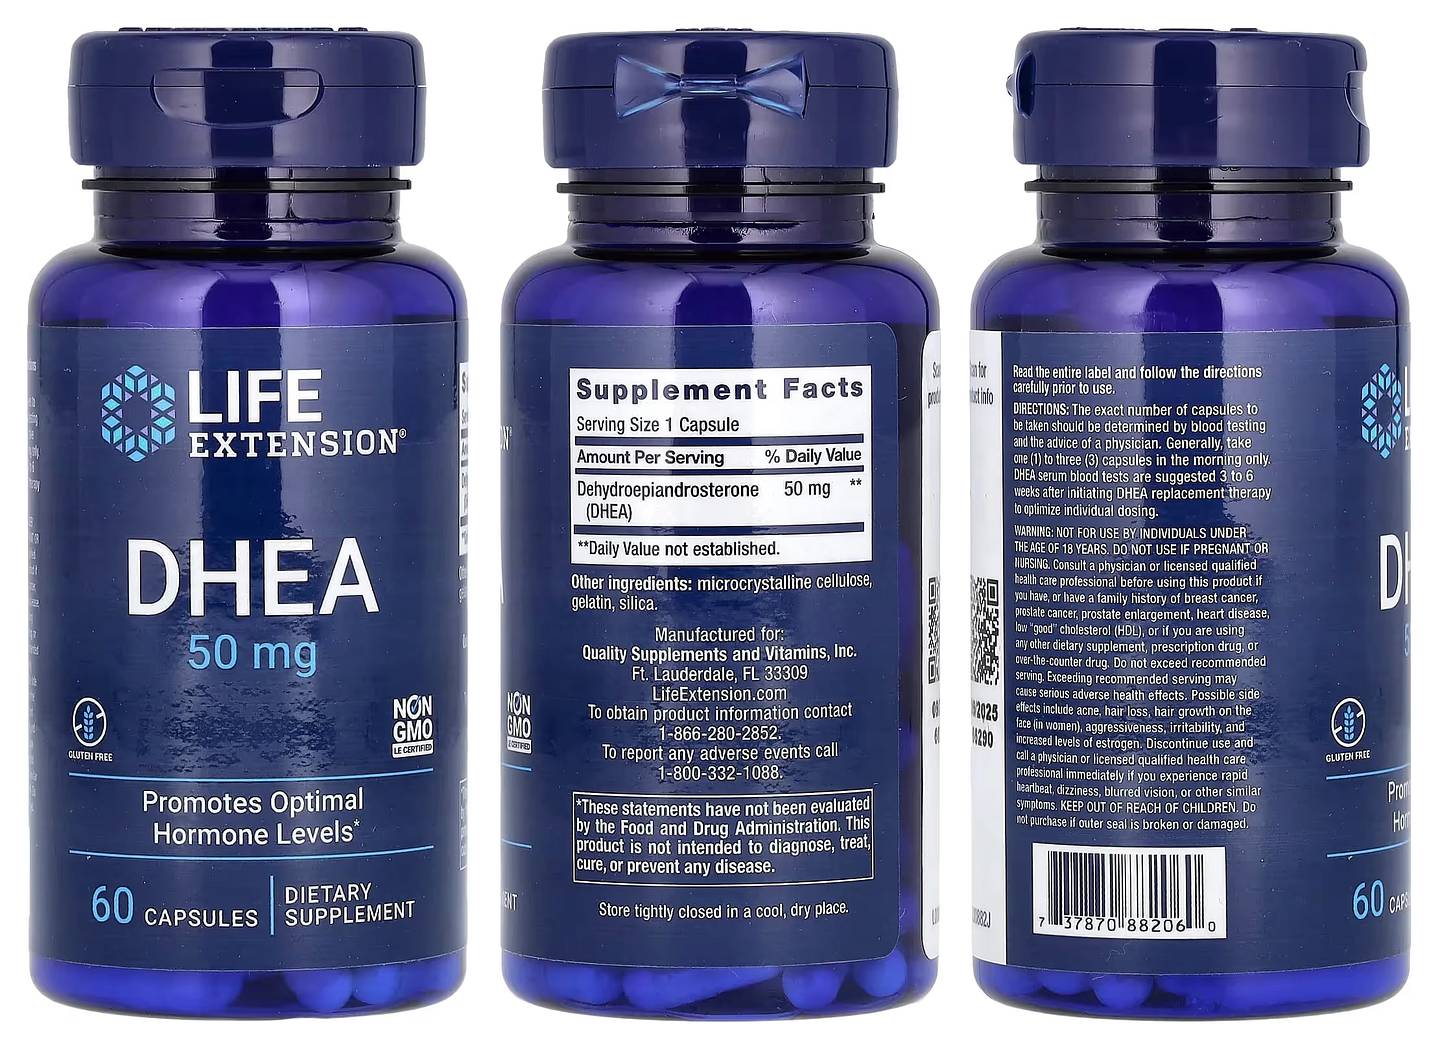 Life Extension, DHEA packaging